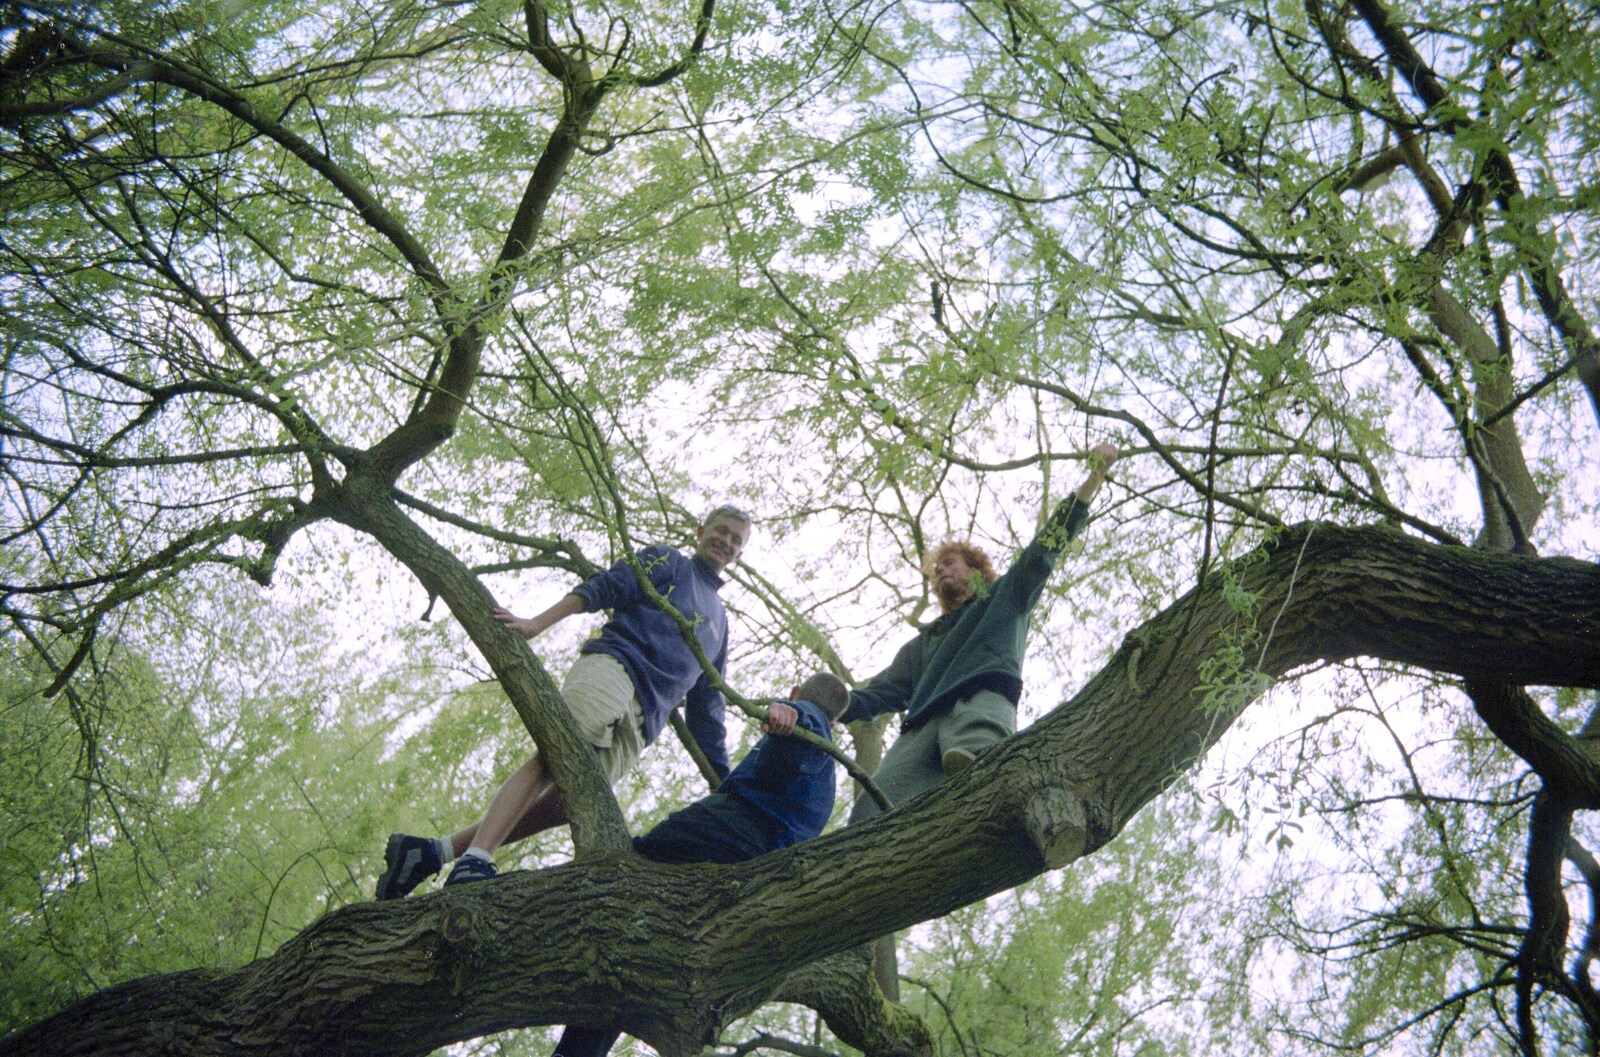 The boys up a tree from A BSCC Bike Ride, Brockdish Greyhound and Hoxne Swan, Suffolk - 4th May 2000